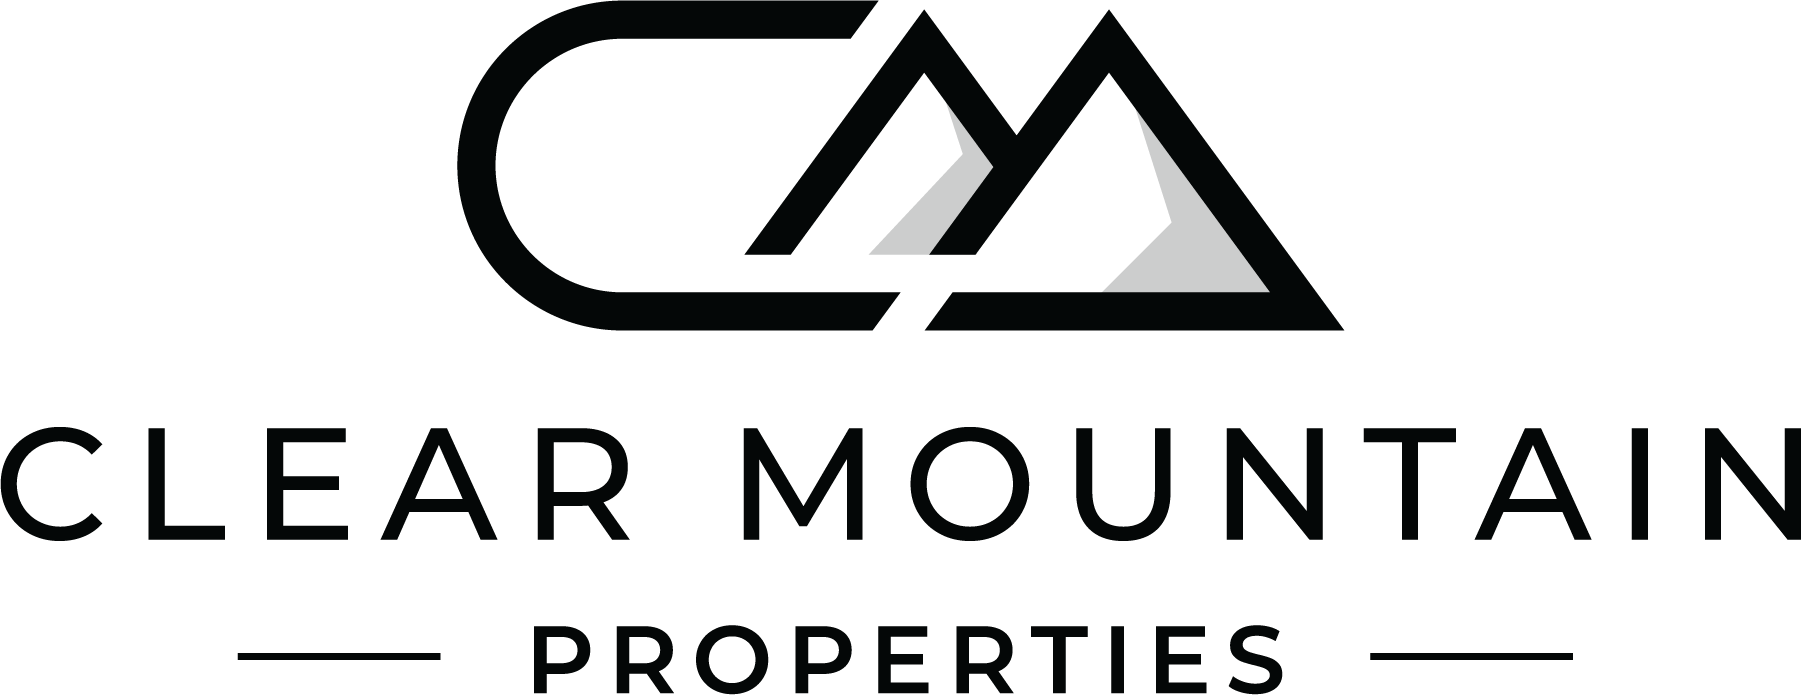 Clear Mountain Properties Management company logo - click to go to site